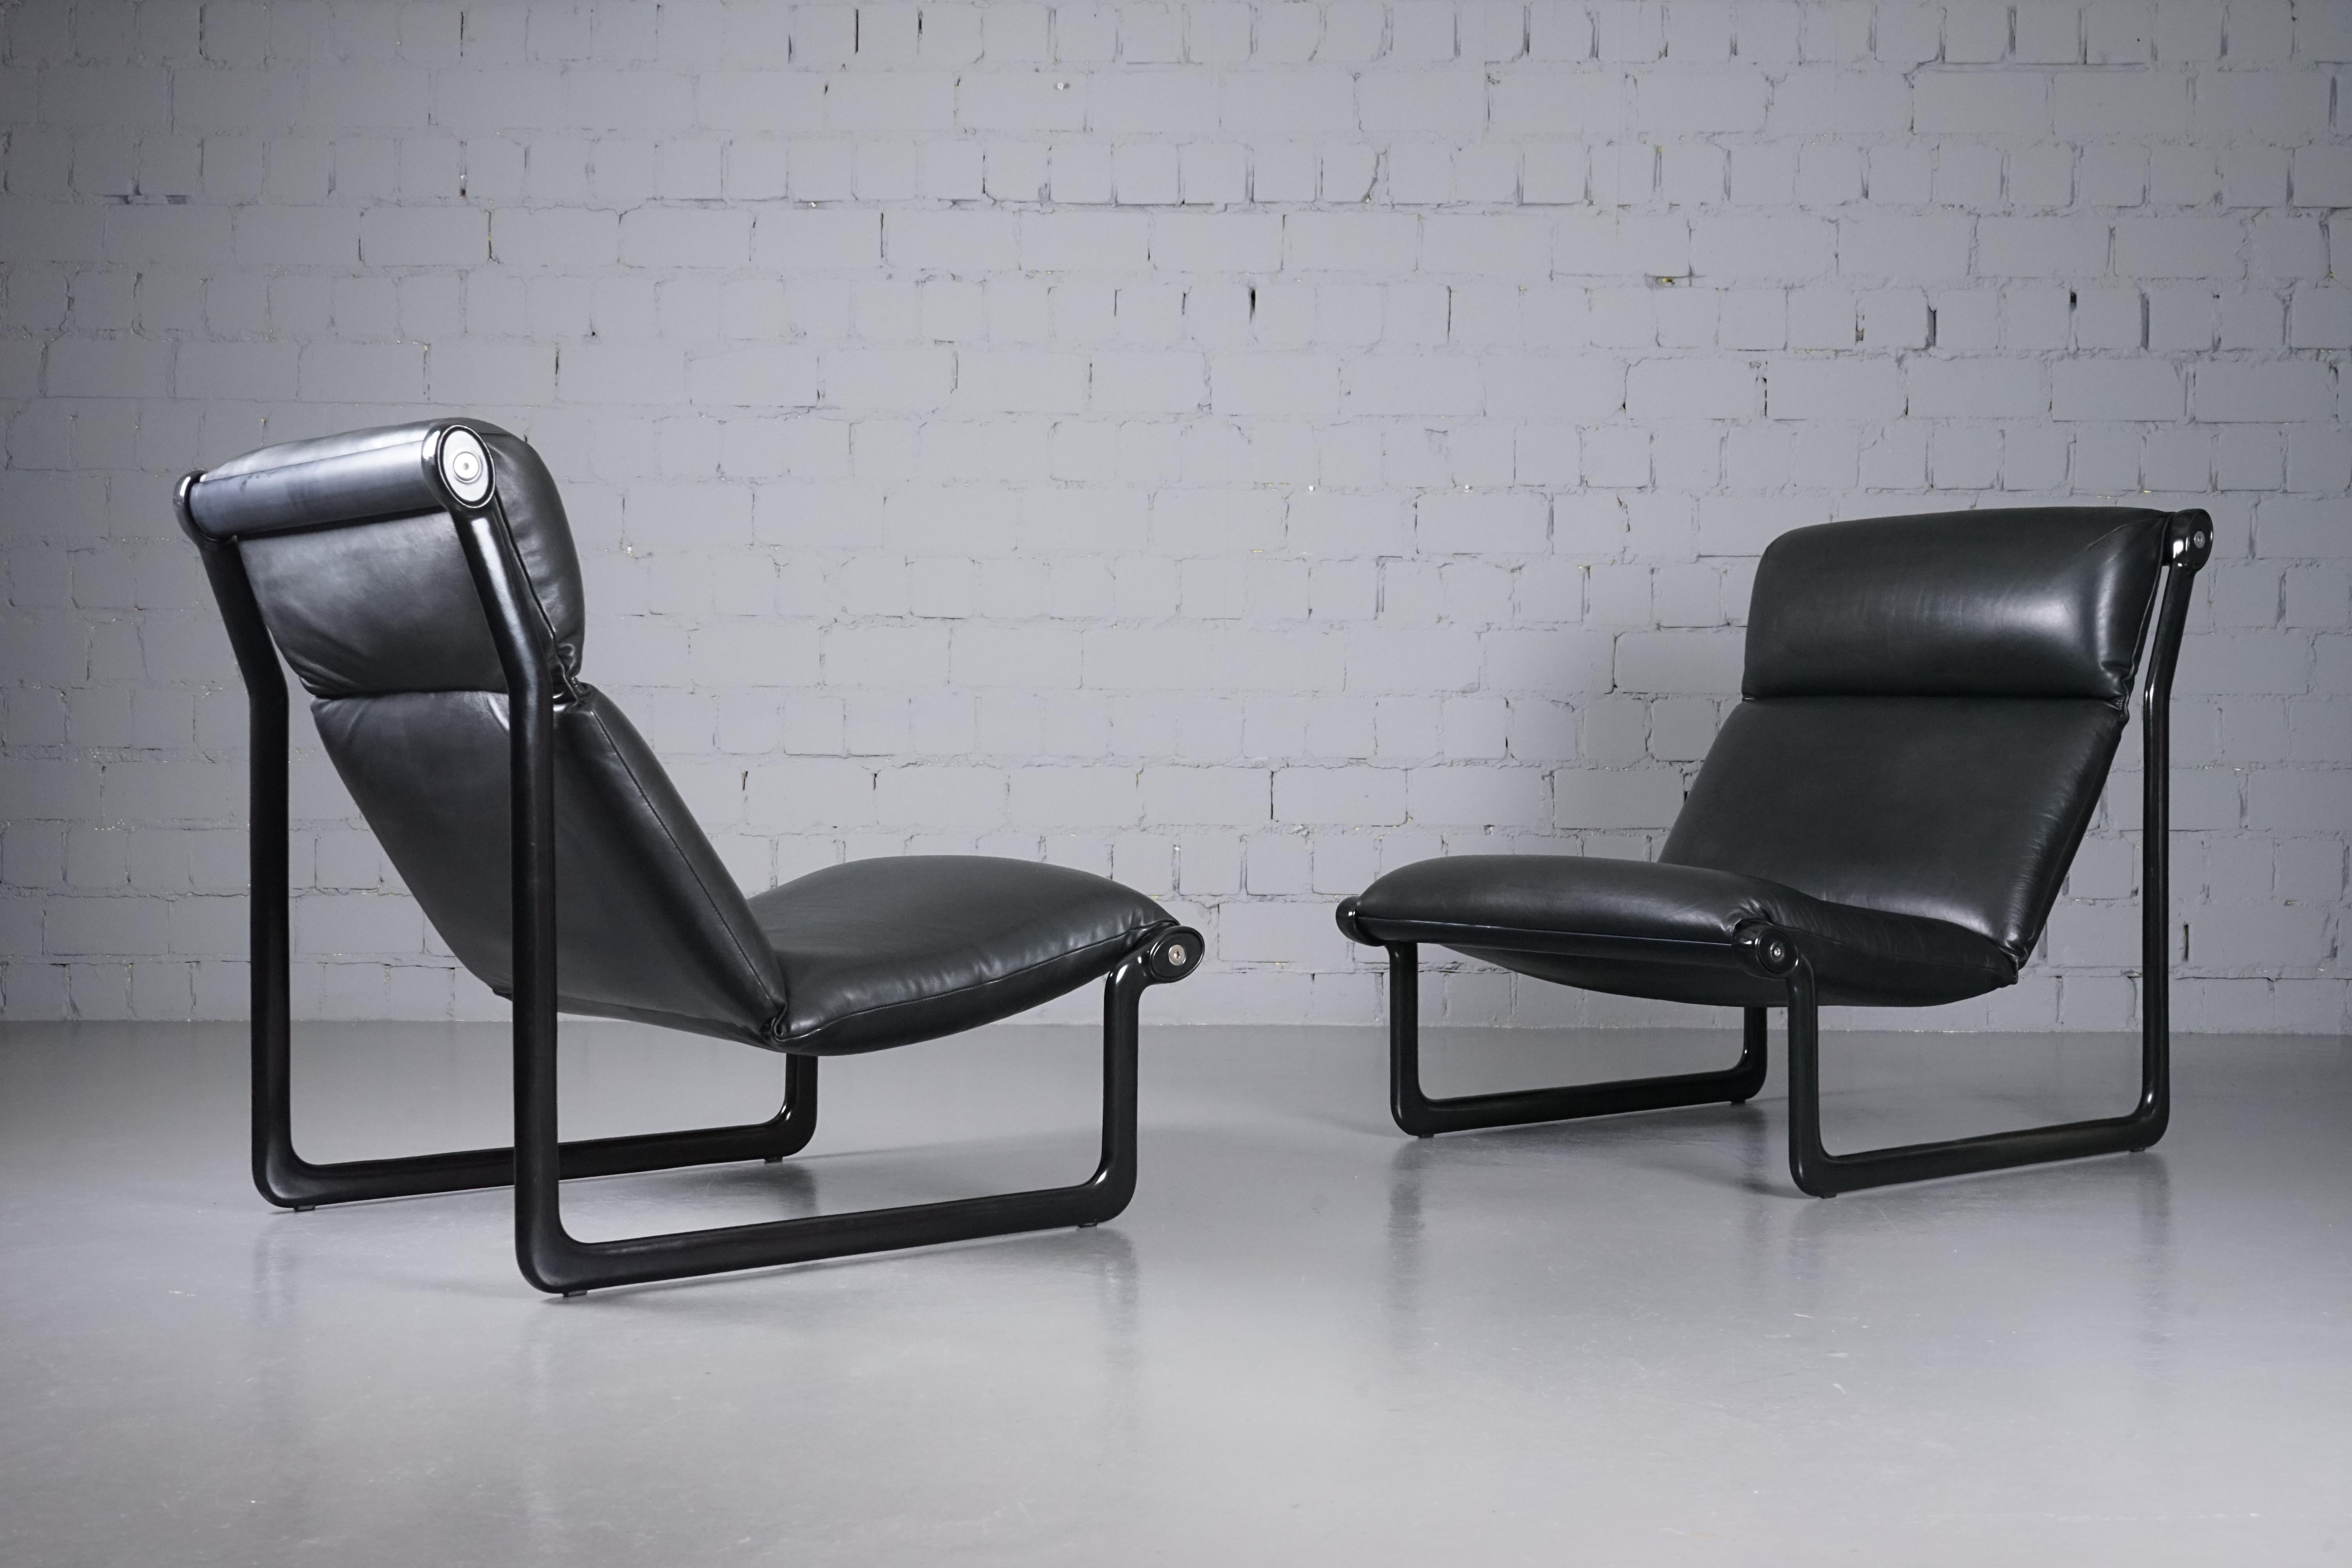 Arm Chair Modell 2001 by Bruce Hannah & Andrew I. Morrison for Knoll Set of 2 For Sale 1